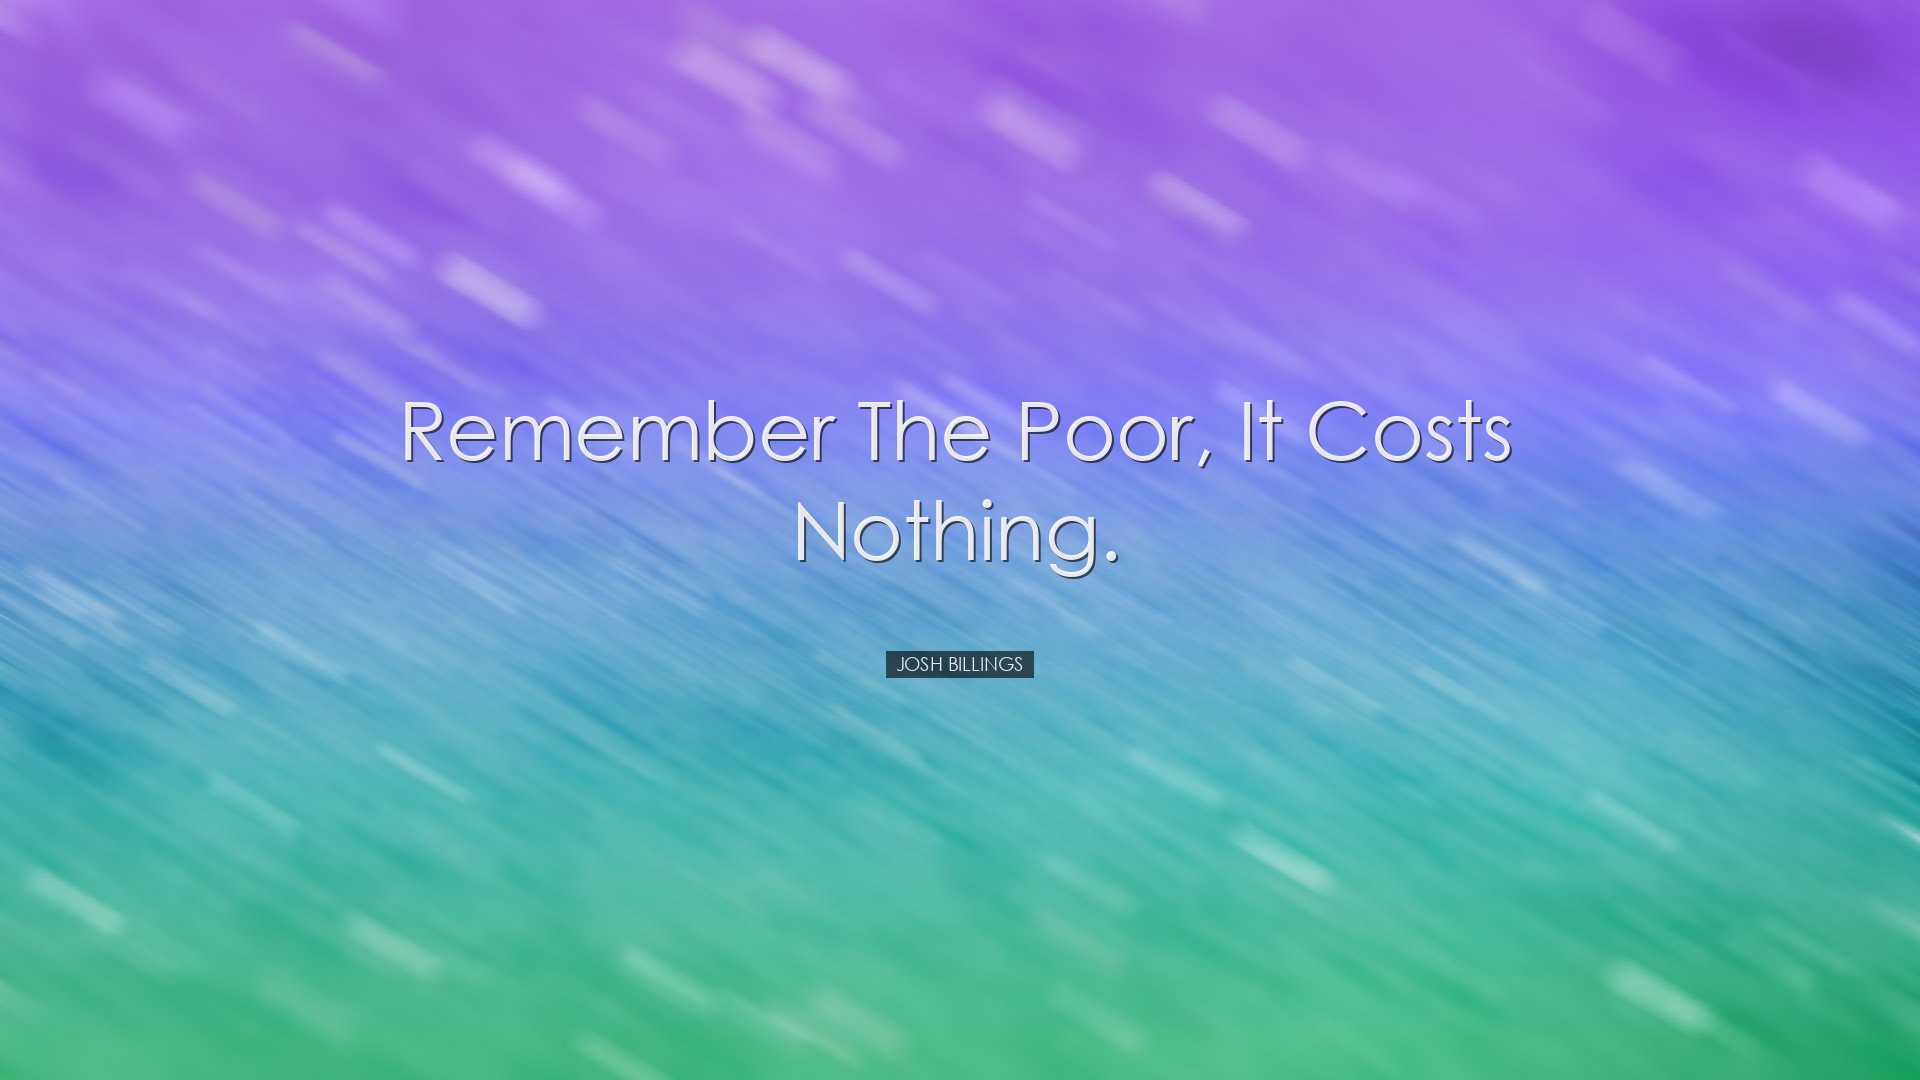 Remember the poor, it costs nothing. - Josh Billings